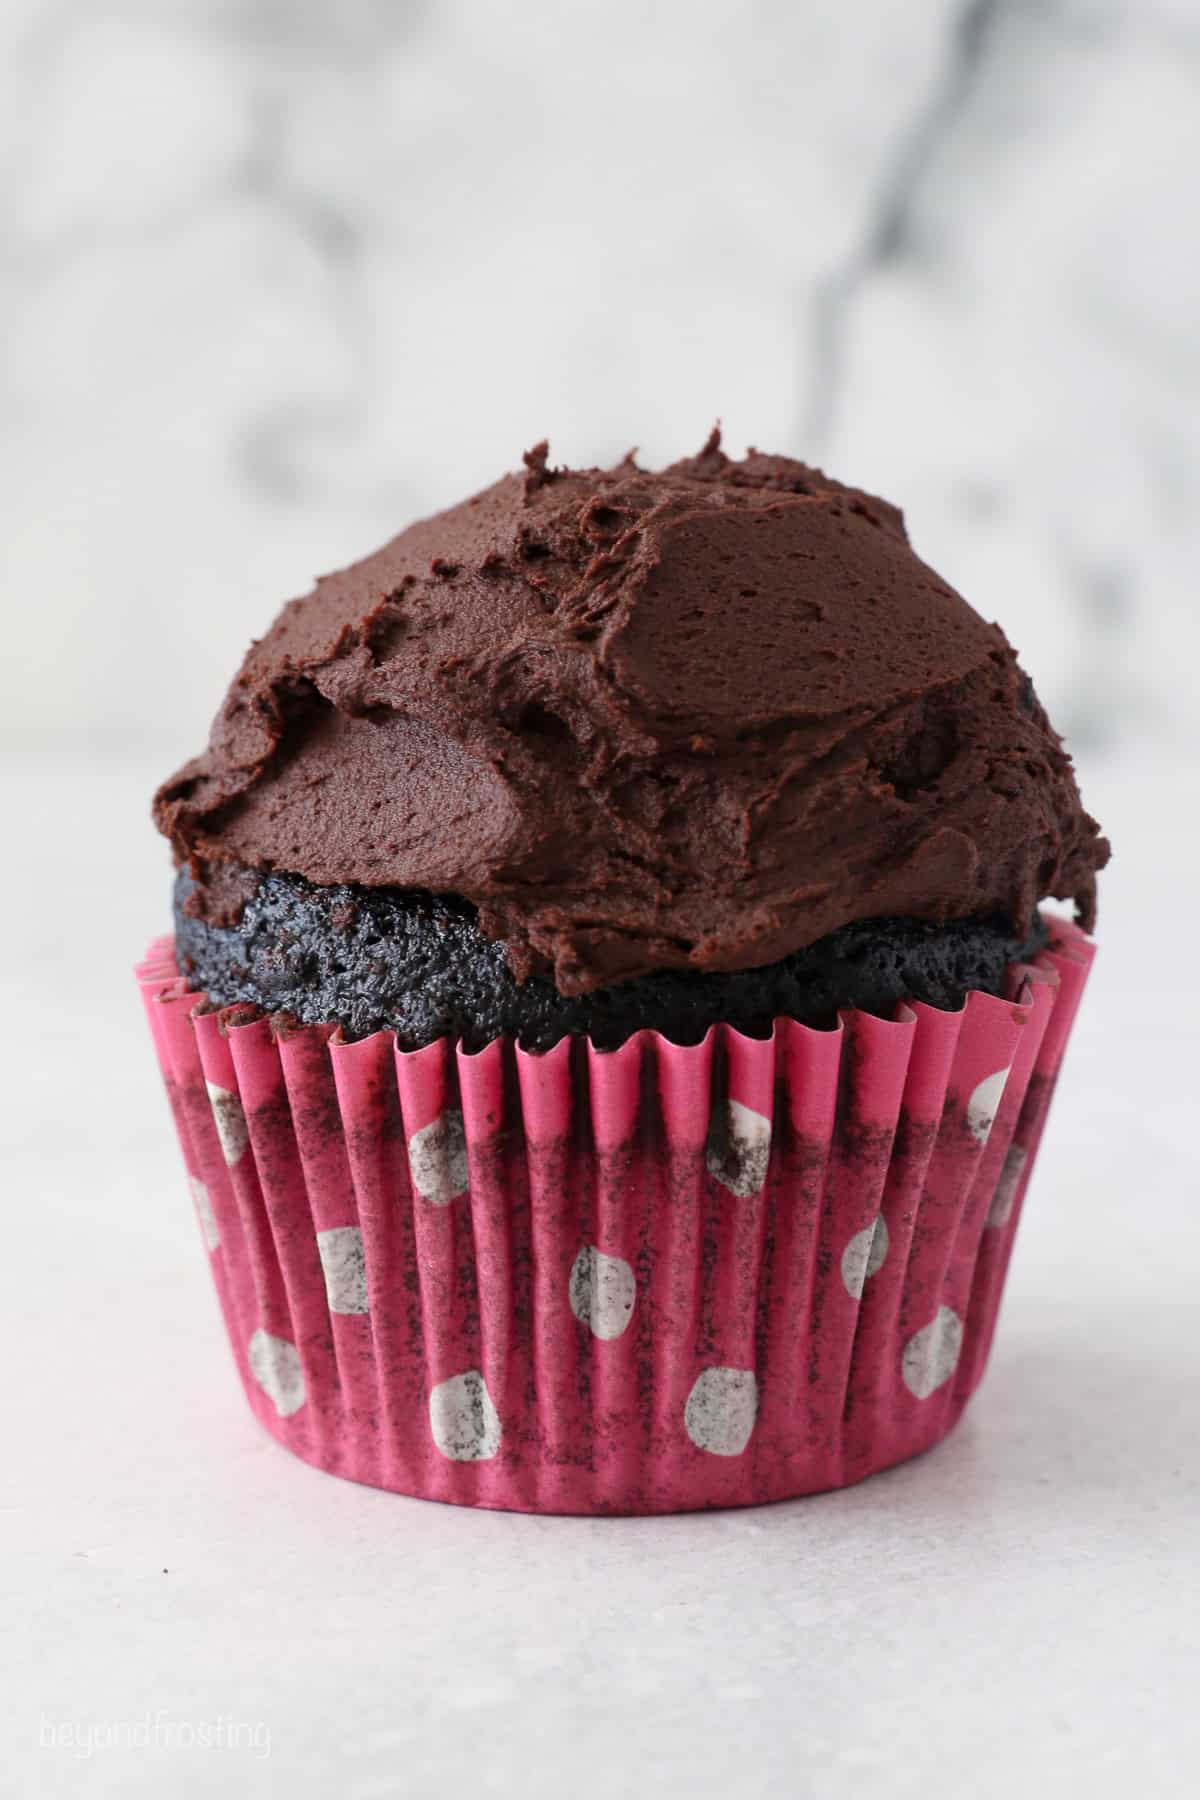 A chocolate cupcake topped with chocolate frosting.